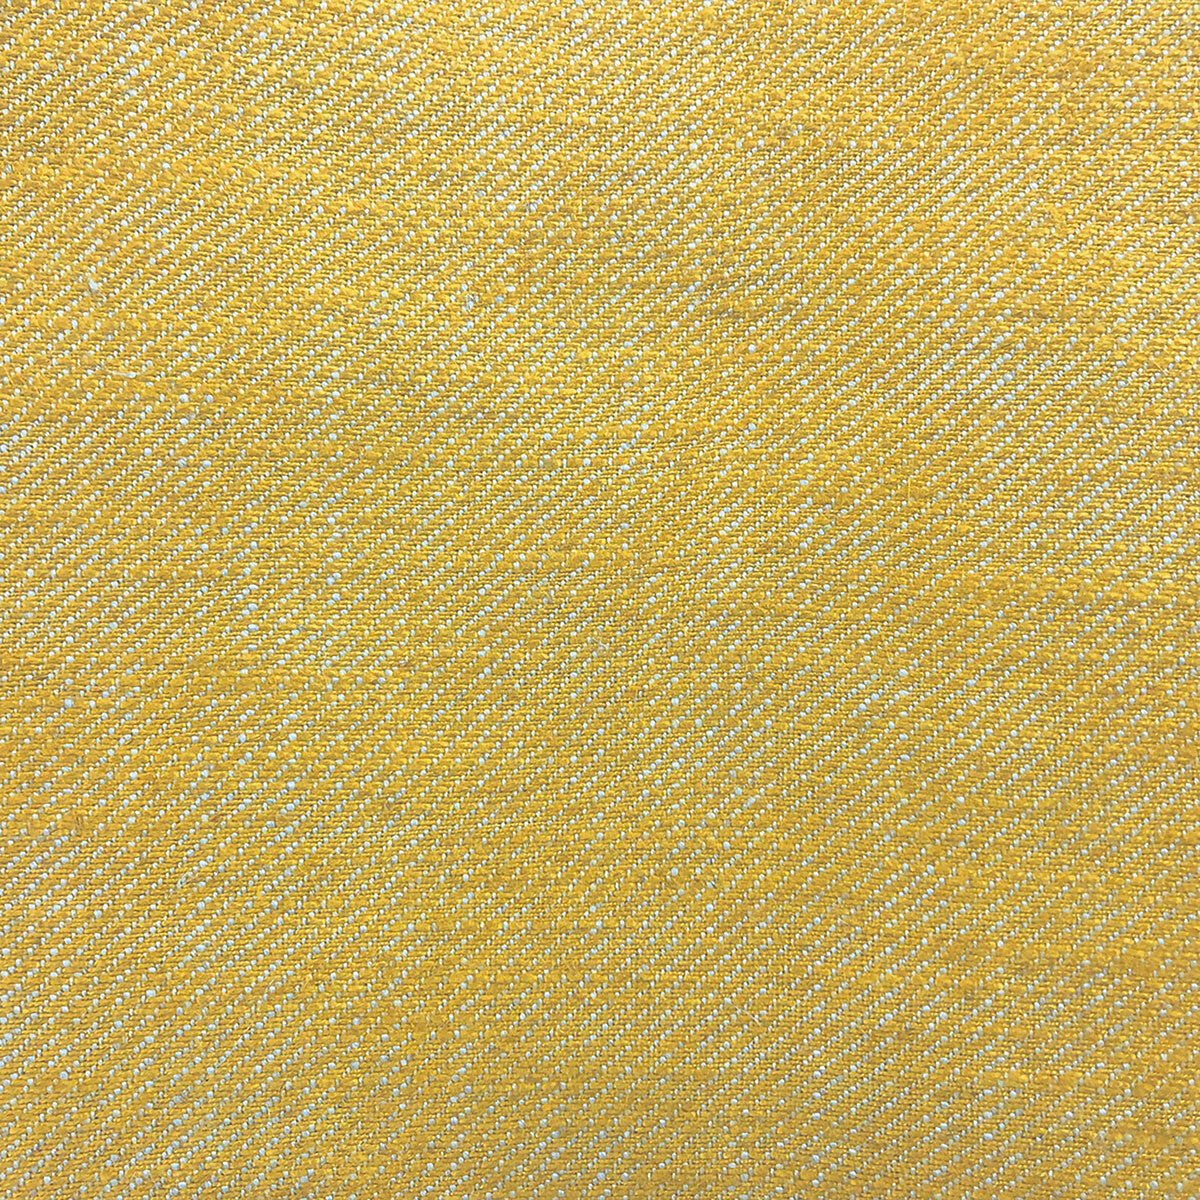 Hisa fabric in amarillo color - pattern GDT5639.016.0 - by Gaston y Daniela in the Gaston Japon collection